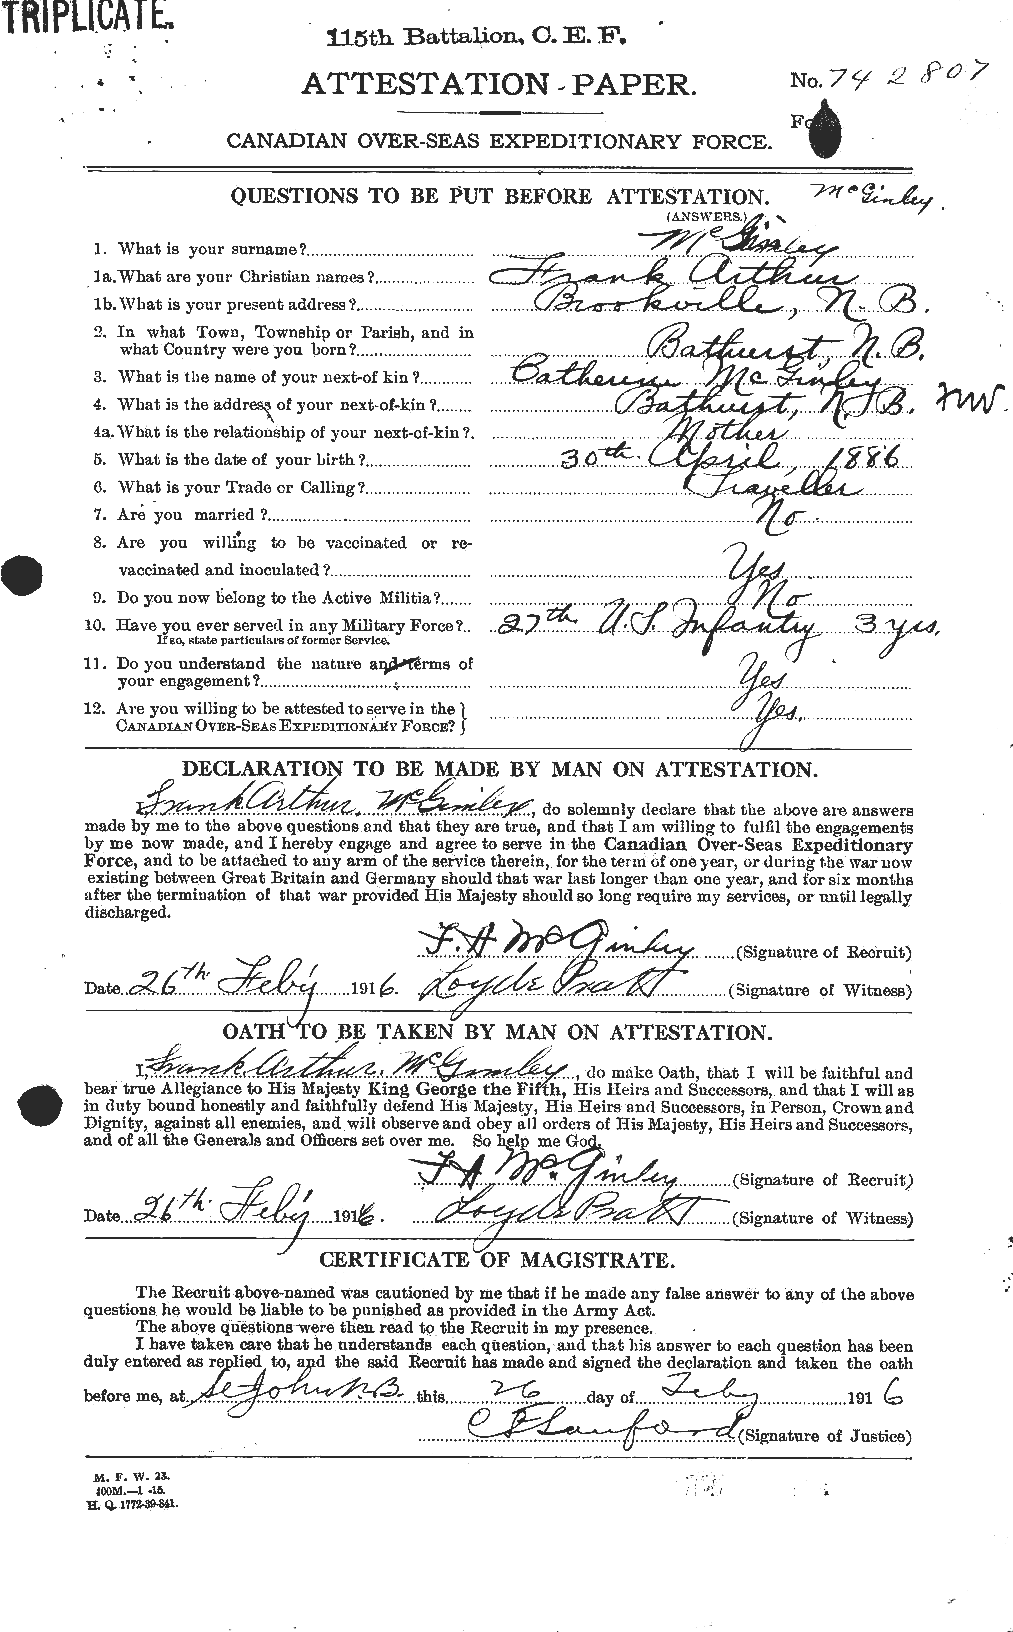 Personnel Records of the First World War - CEF 526314a